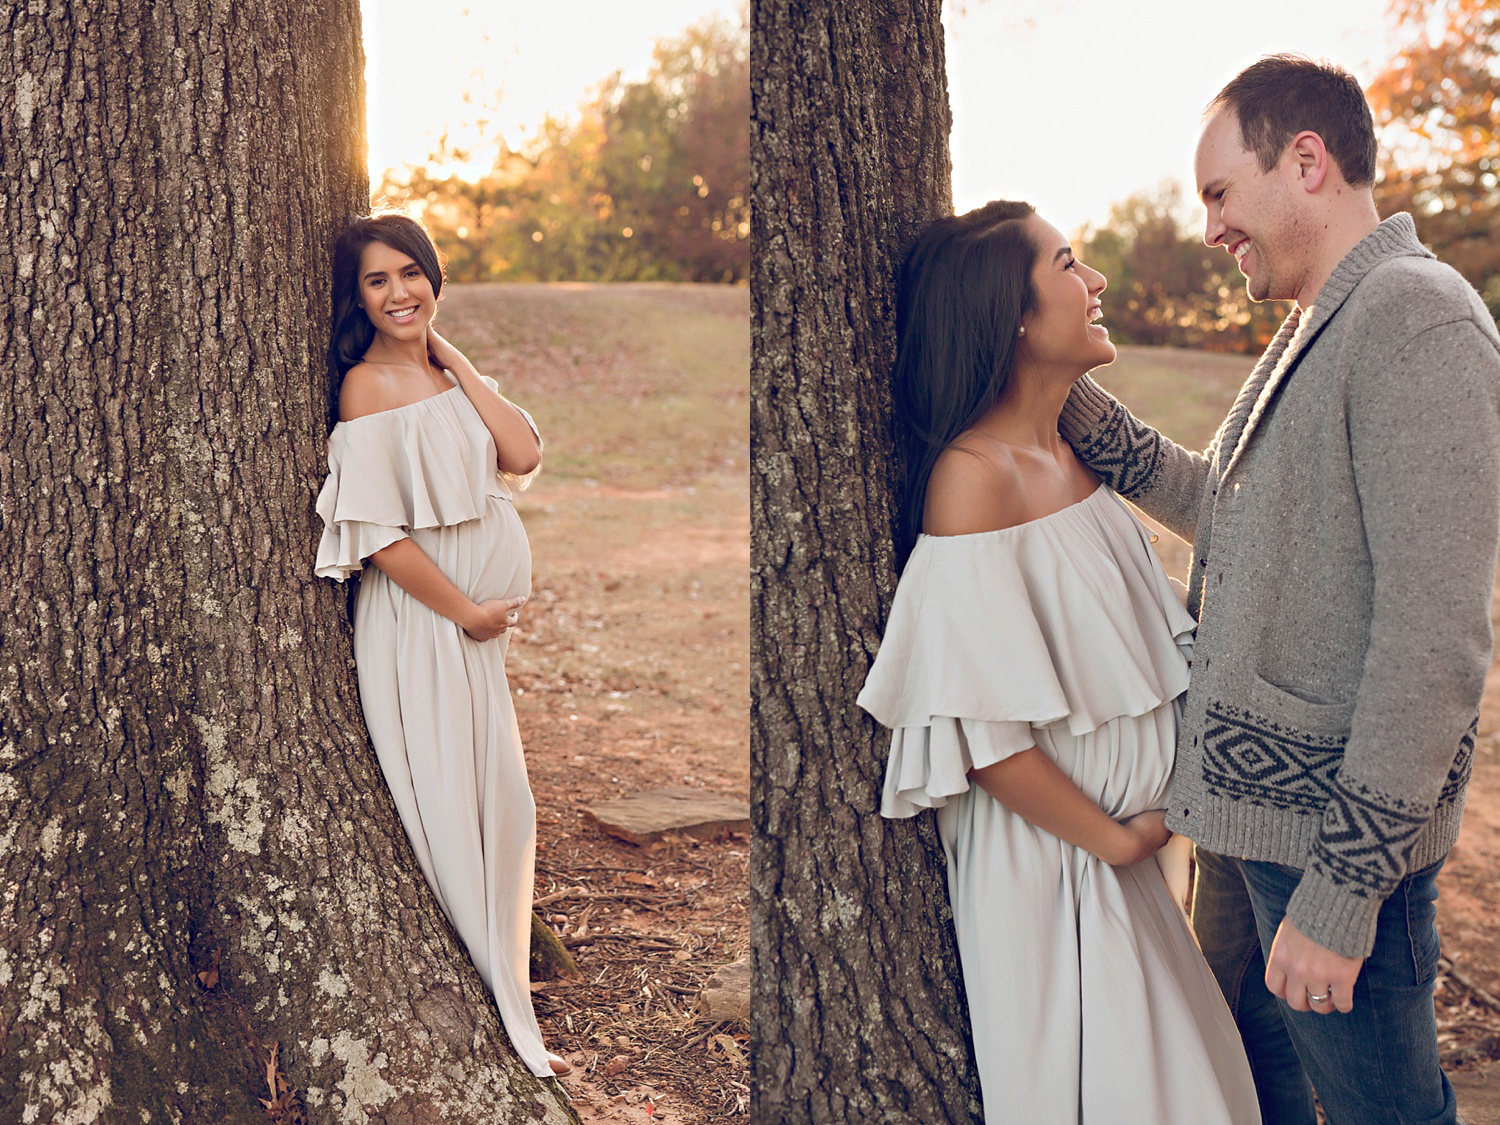  Maternity pictures incorporating a tree and the sunset in an Atlanta park.&nbsp; 